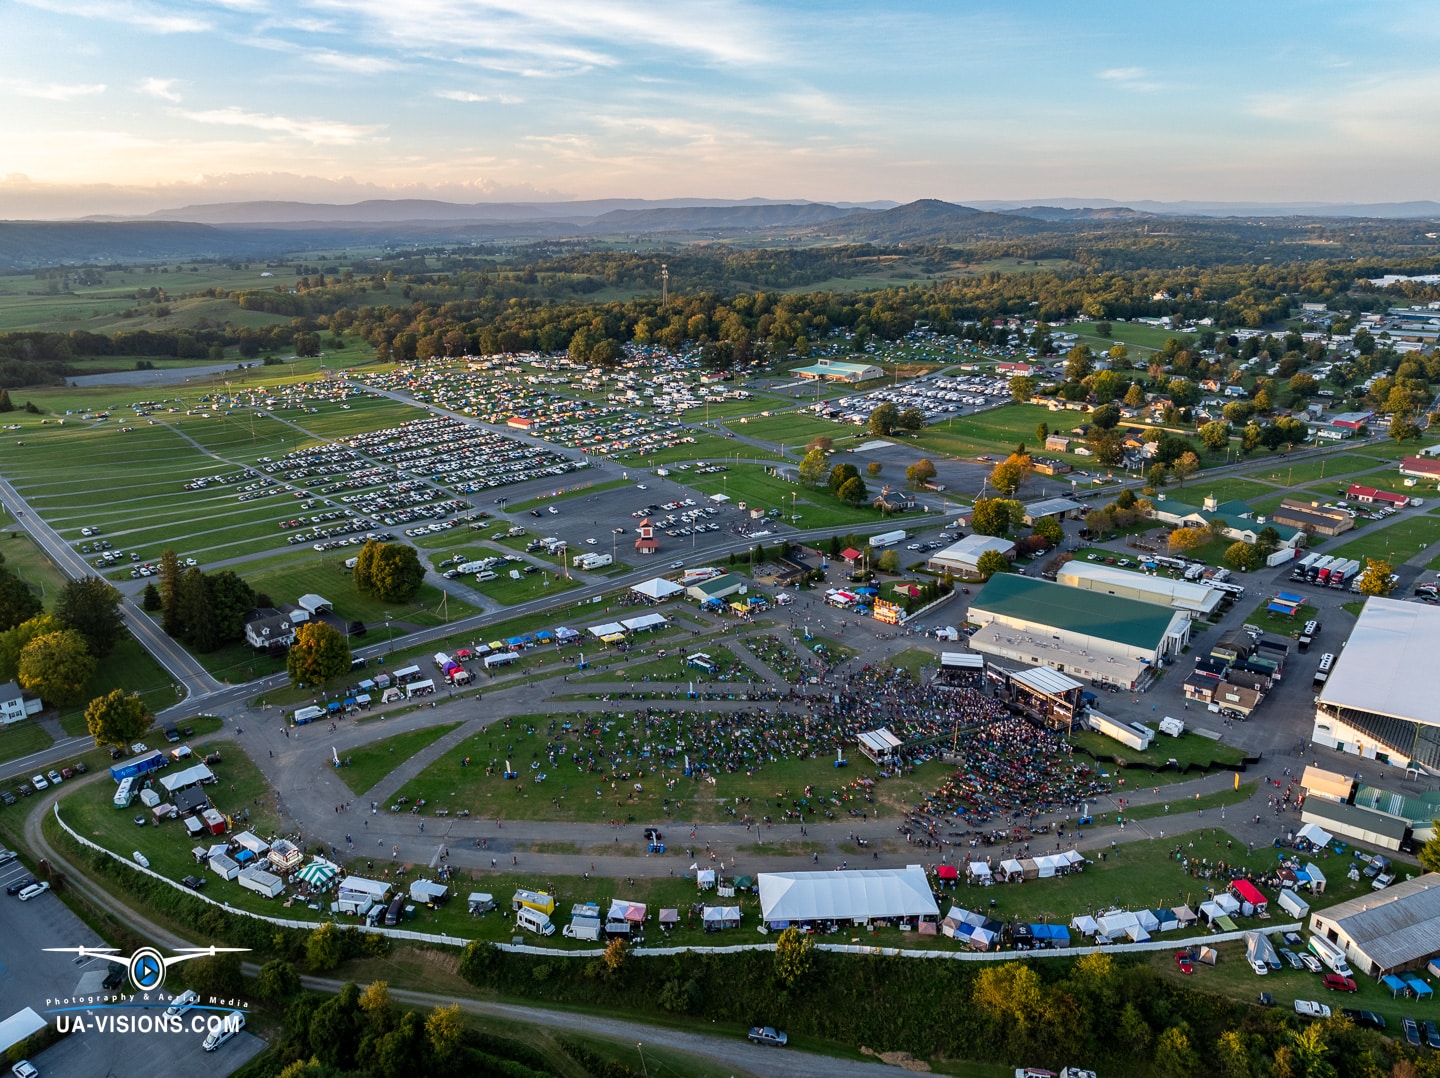 Aerial view of Healing Appalachia as twilight hugs the hills and the festival lights up.